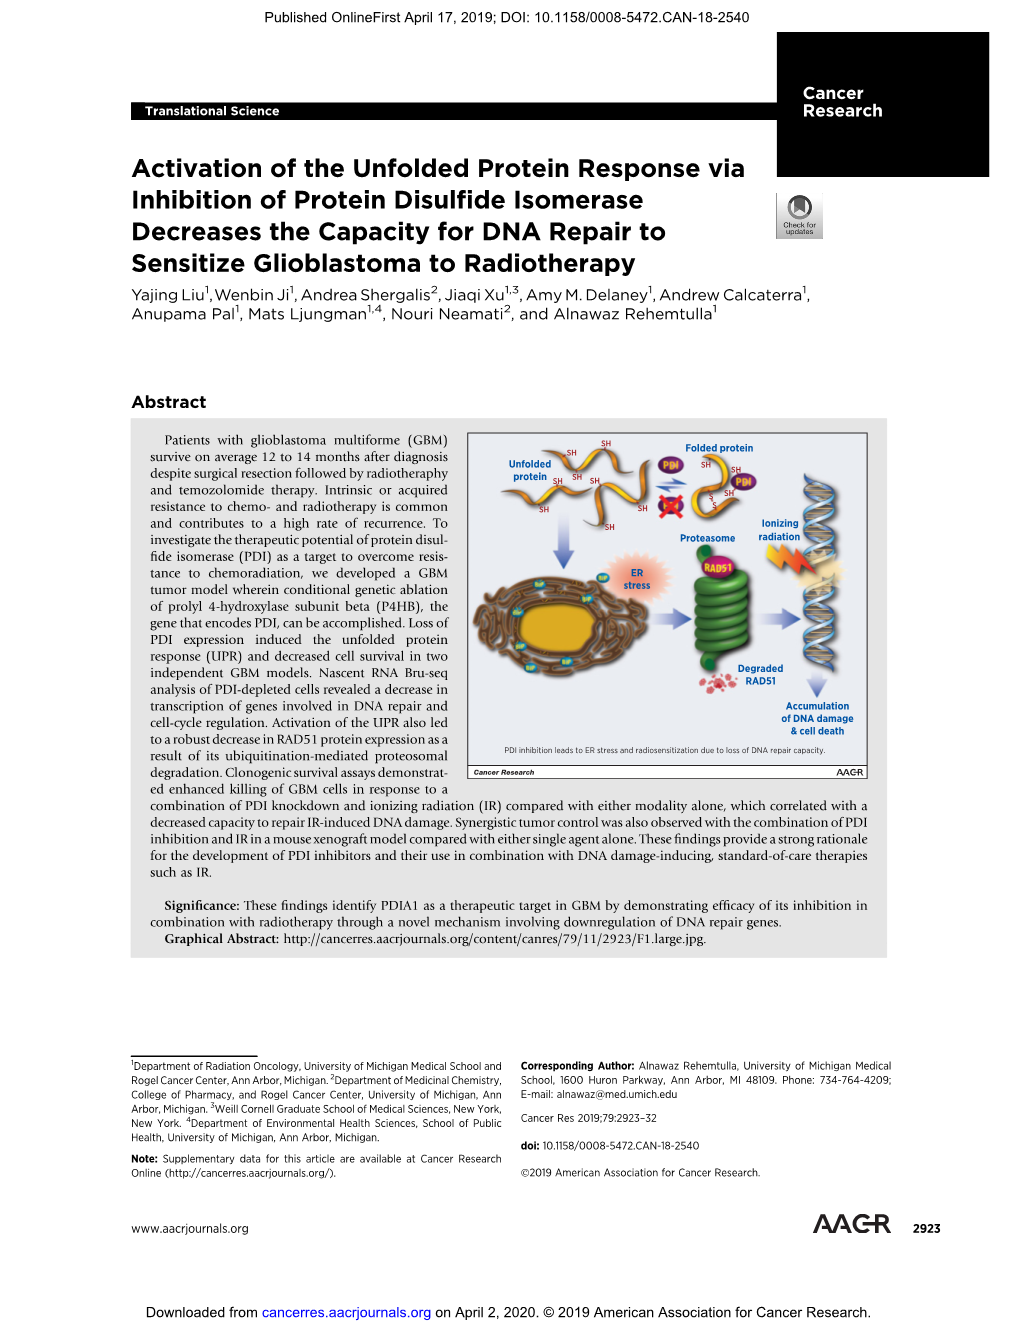 Activation of the Unfolded Protein Response Via Inhibition of Protein Disulfide Isomerase Decreases the Capacity for DNA Repair